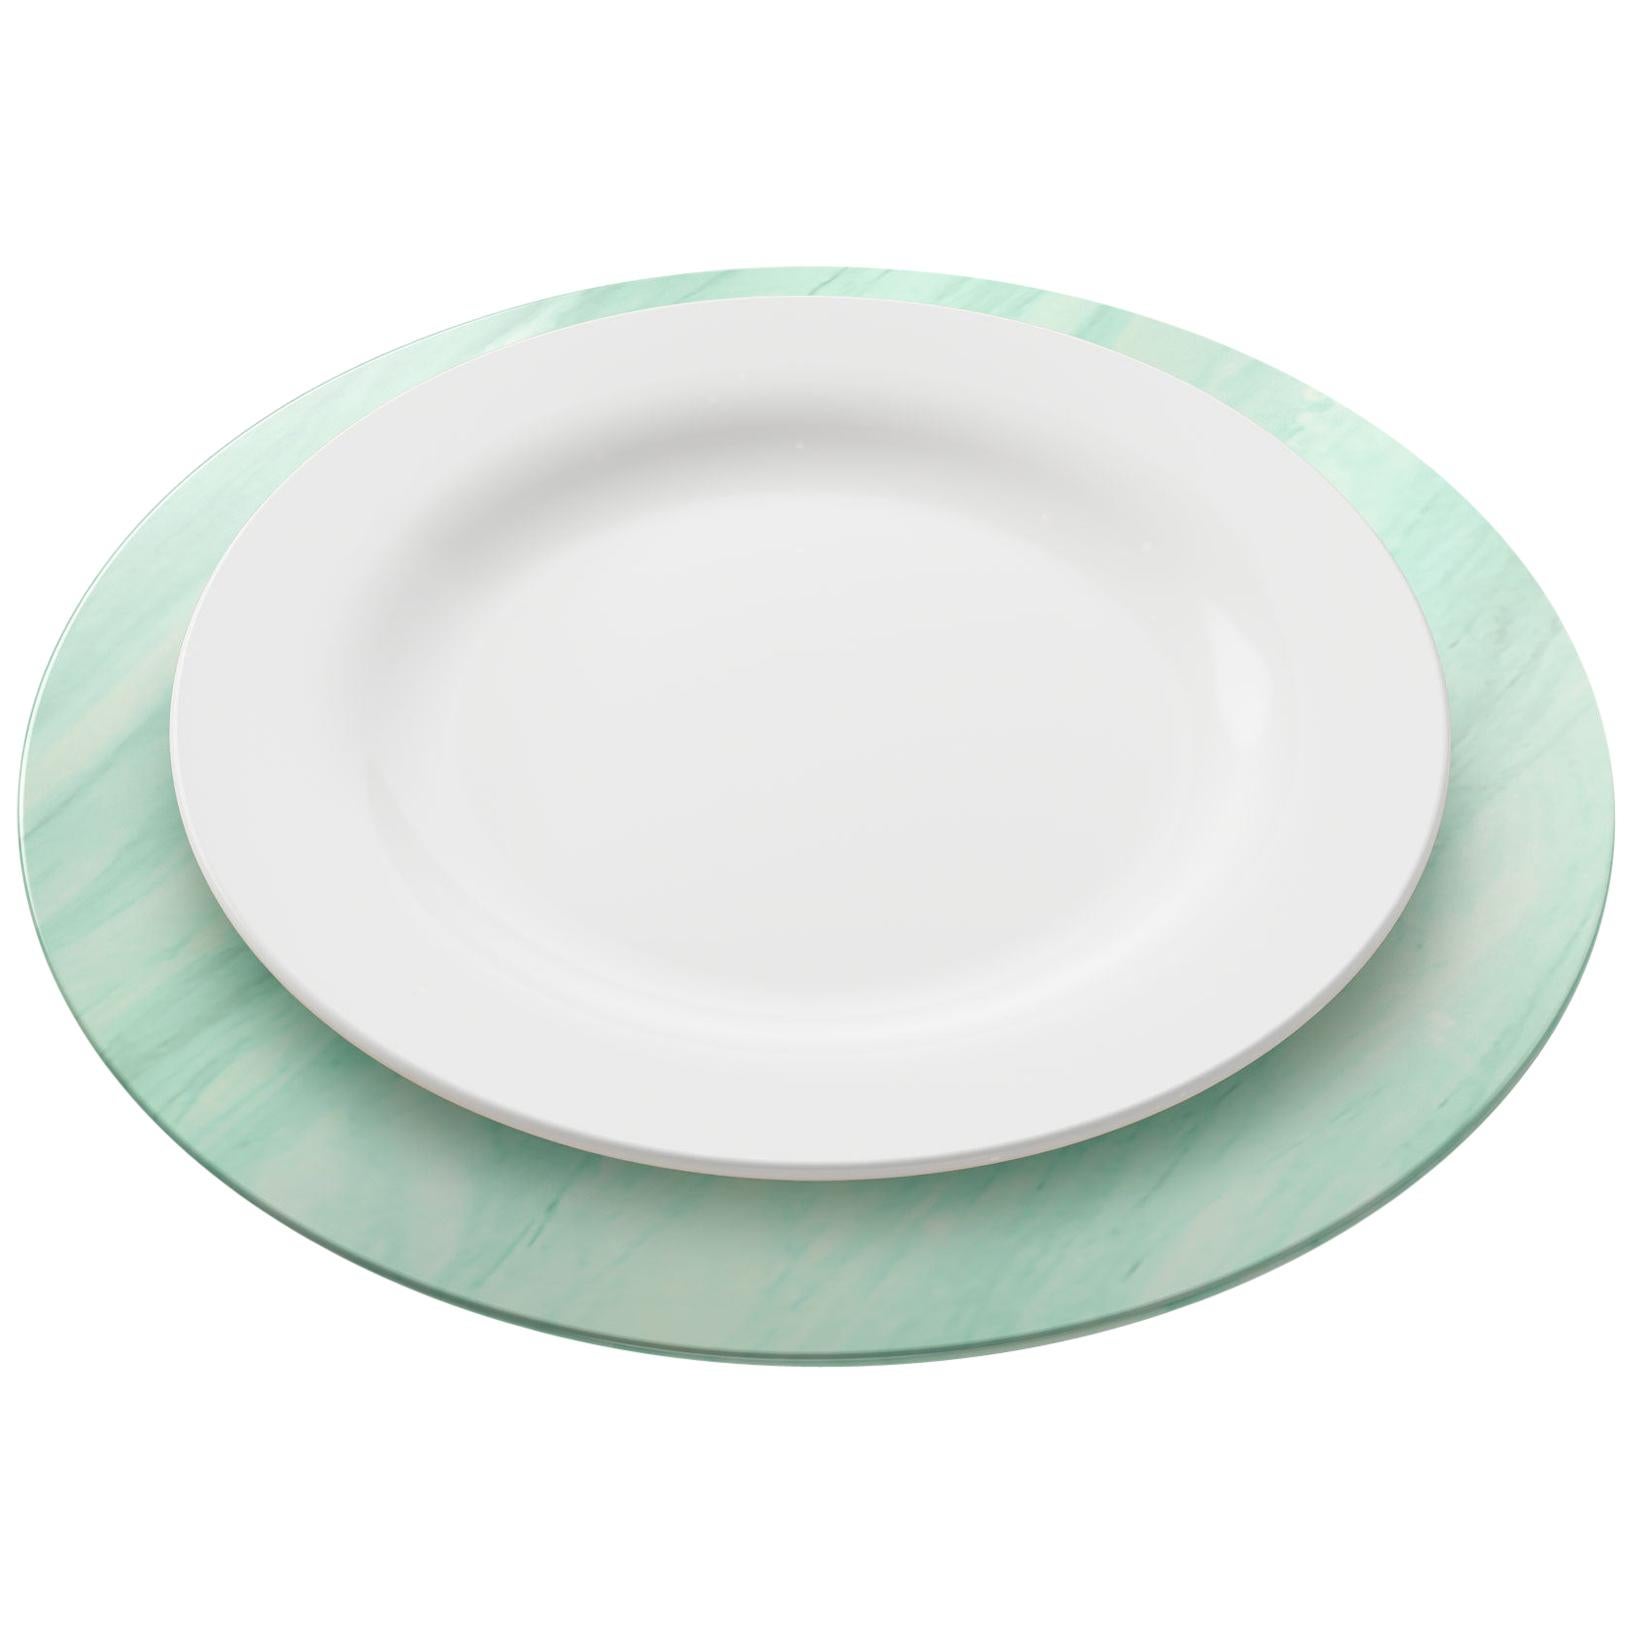 green plate chargers